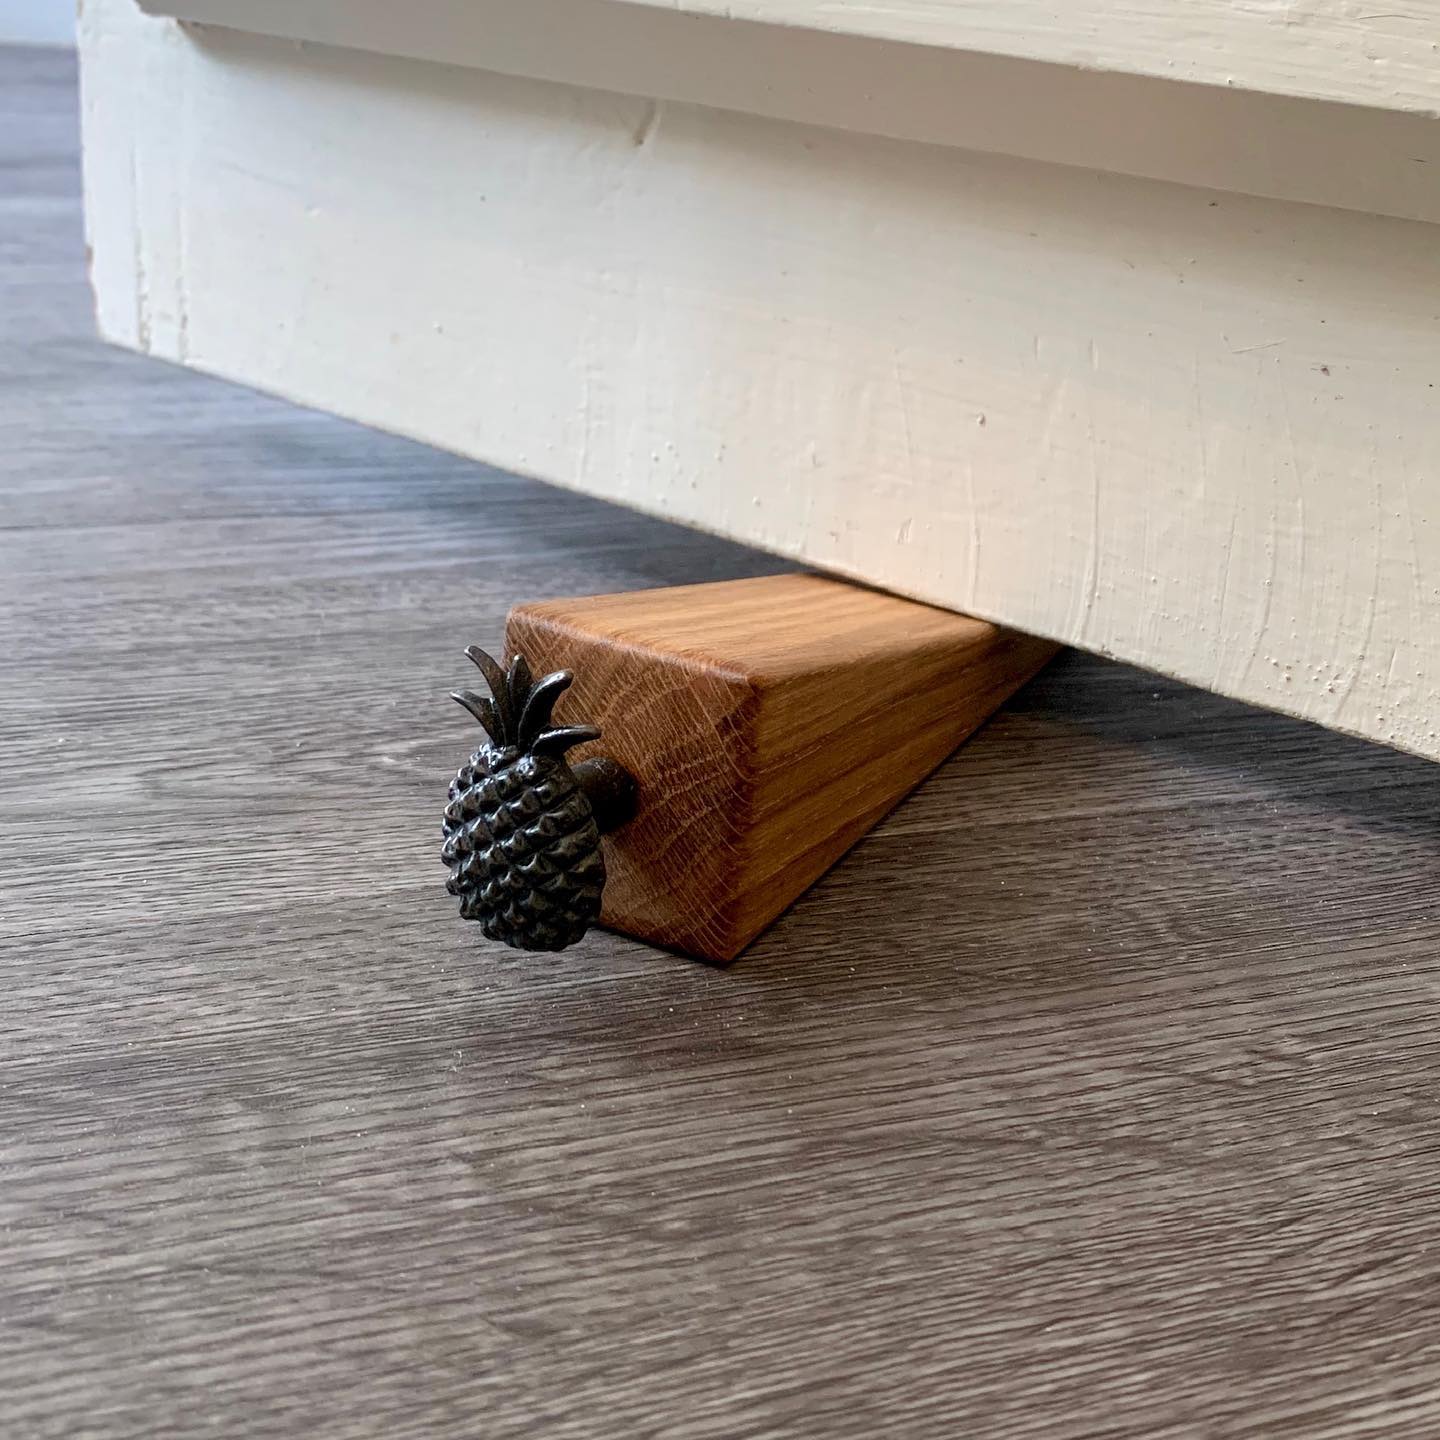 SALE! - Dark grey metal Pineapple Door Wedge NOW £9 plus shipping Available on our website- follow the link in our bio Made from solid oak, this is a lovely addition to any home, a unique and useful gift! .#homedecor #valentine #somethingunique #pineapple #oak #madefromwood #design #handmade #gingerandtweed #madeinwiltshire #cottagelife